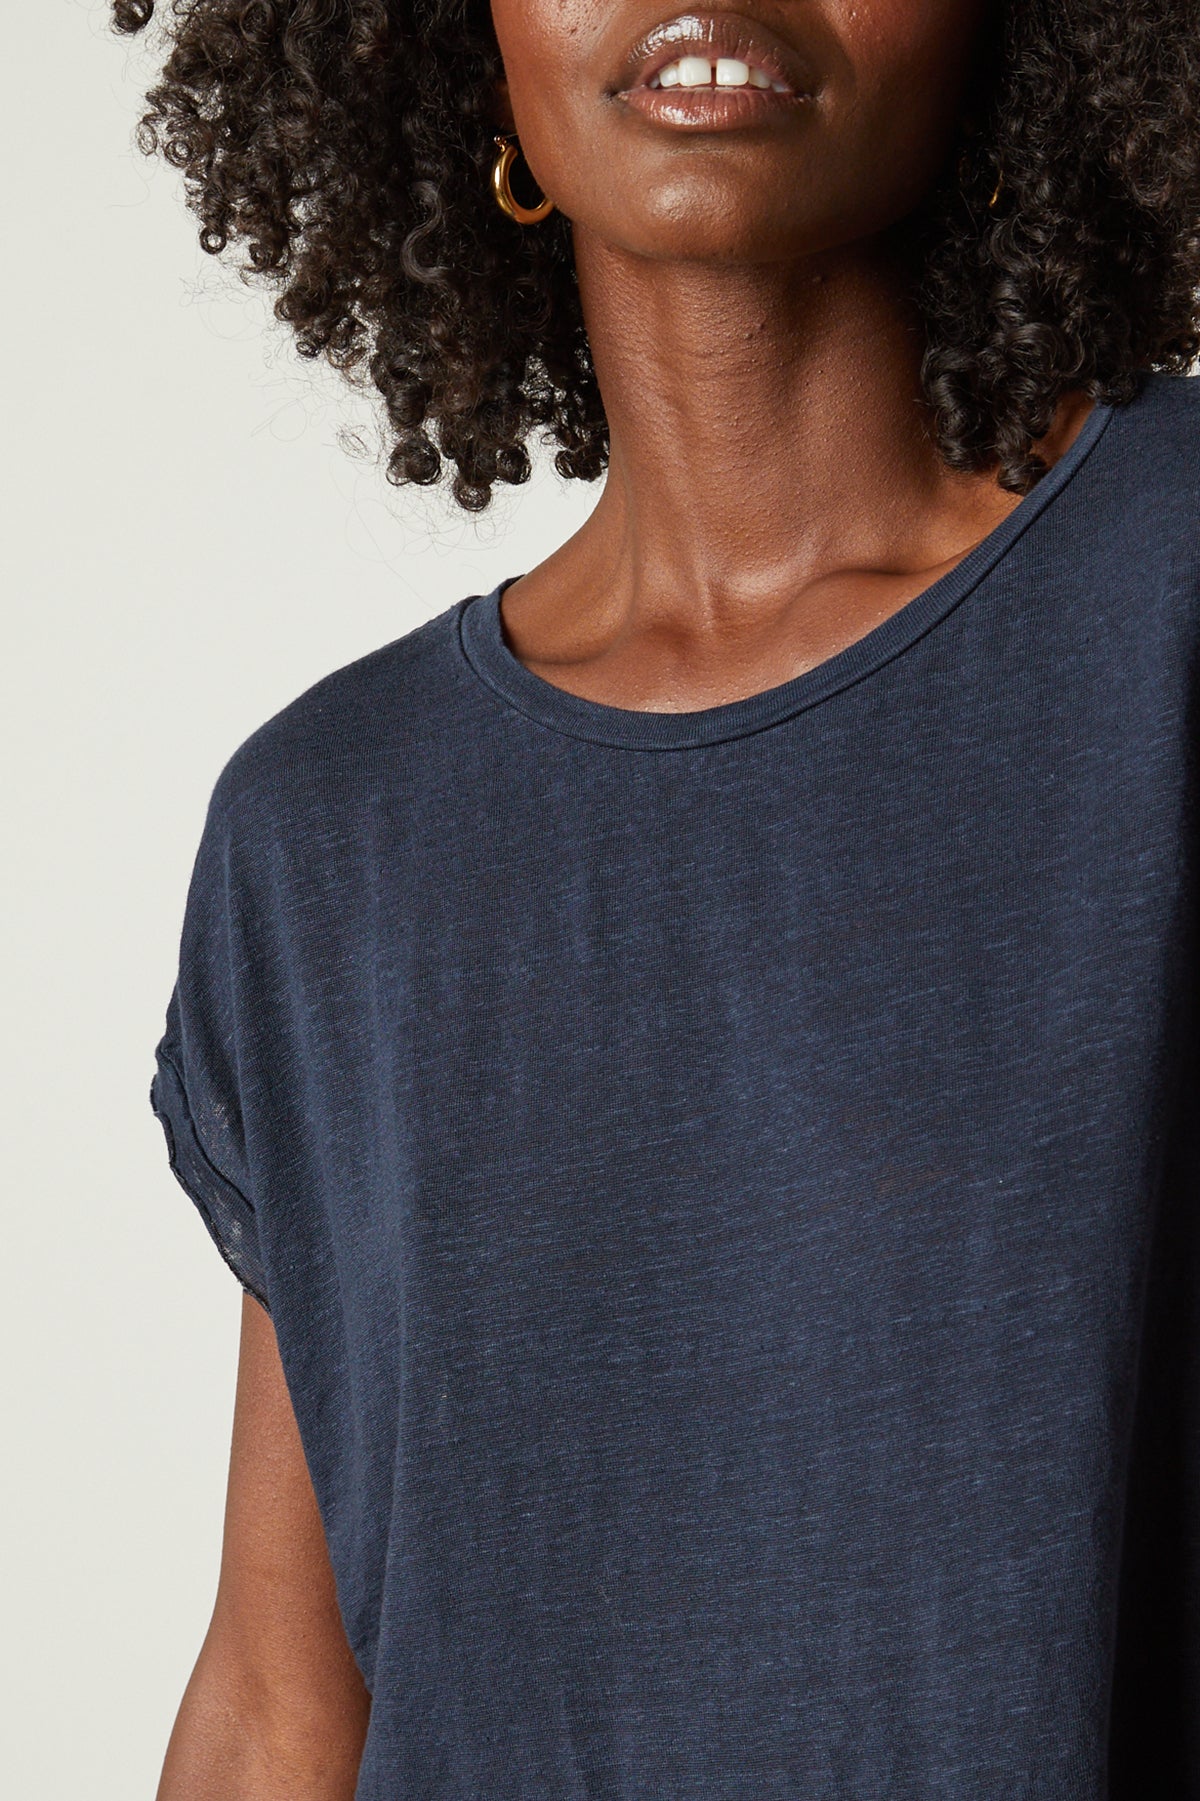   Hudson tee in baltic blue close up front detail 